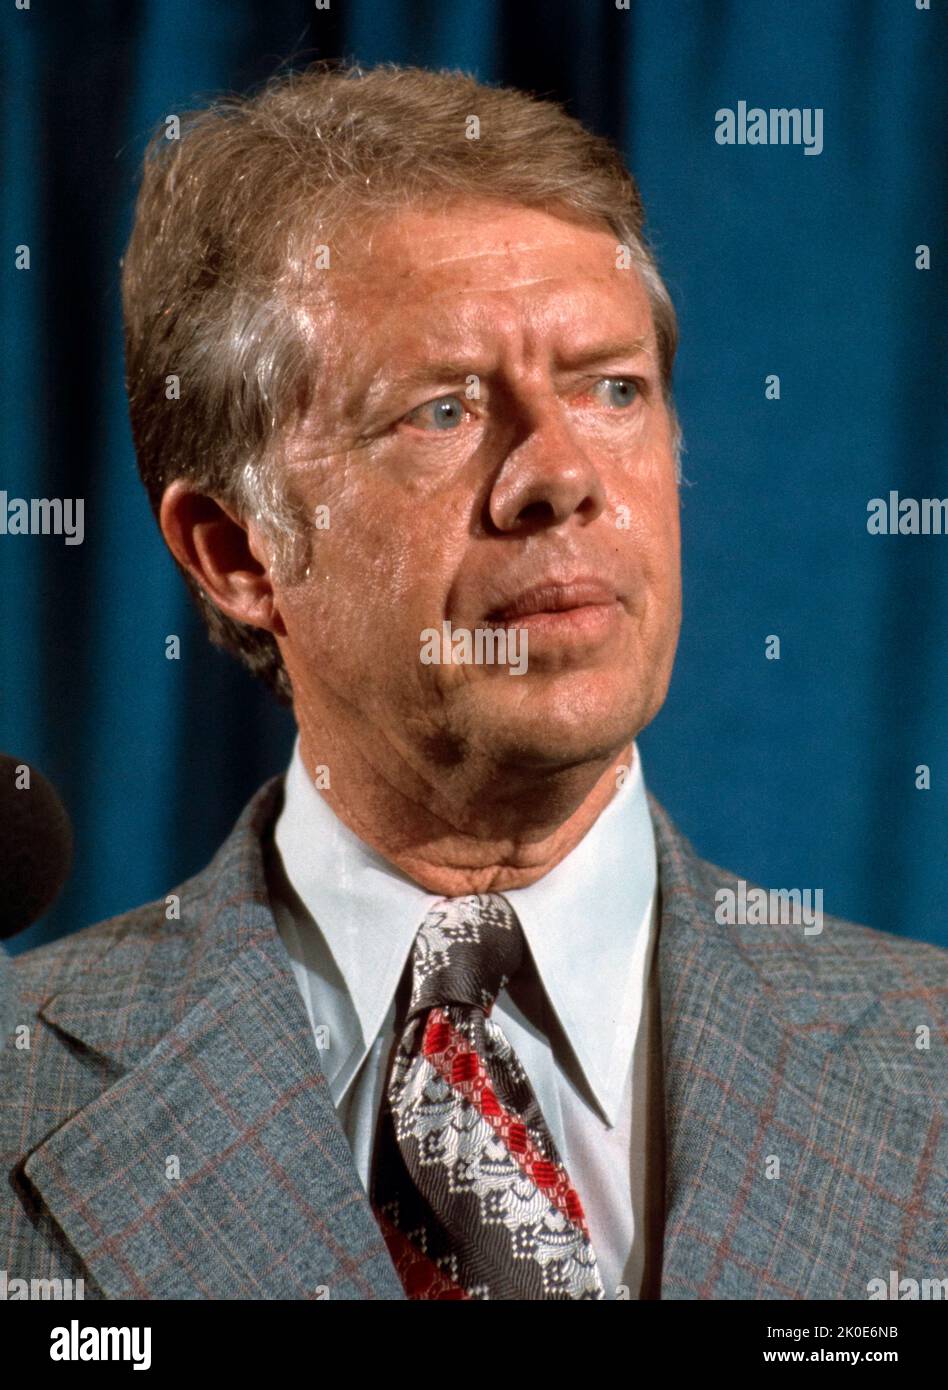 James Earl Carter Jr. (born October 1, 1924) American politician who served as the 39th president of the United States from 1977 to 1981. A member of the Democratic Party, he previously served as the 76th governor of Georgia from 1971 to 1975 and as a Georgia State senator from 1963 to 1967. Stock Photo